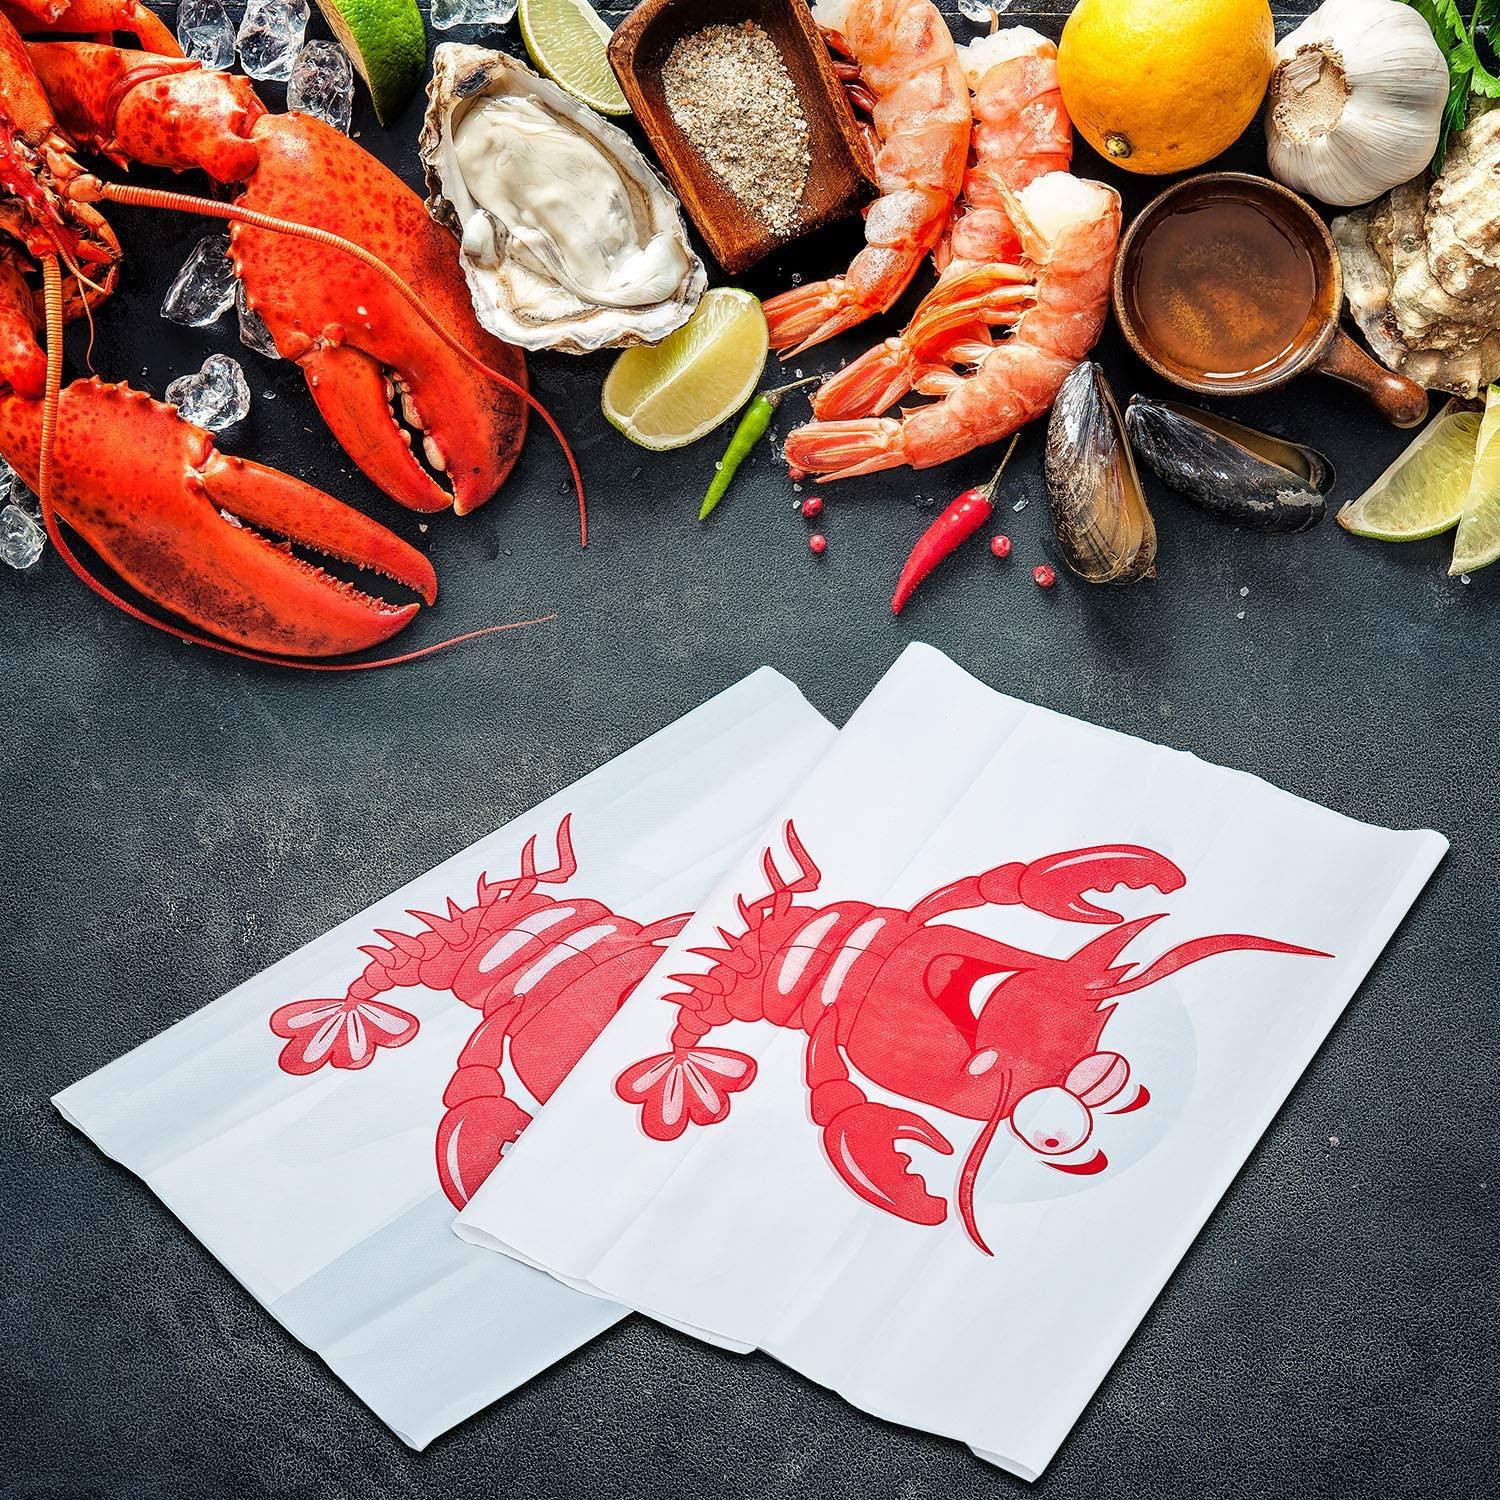 Umigy 200 Pcs Seafood Boil Party Supplies Include Funny 50 Lobster Bib  Crawfish Disposable Adult Bibs 50 Wet Wipe Bundle Moist Towelettes 100  Pairs of